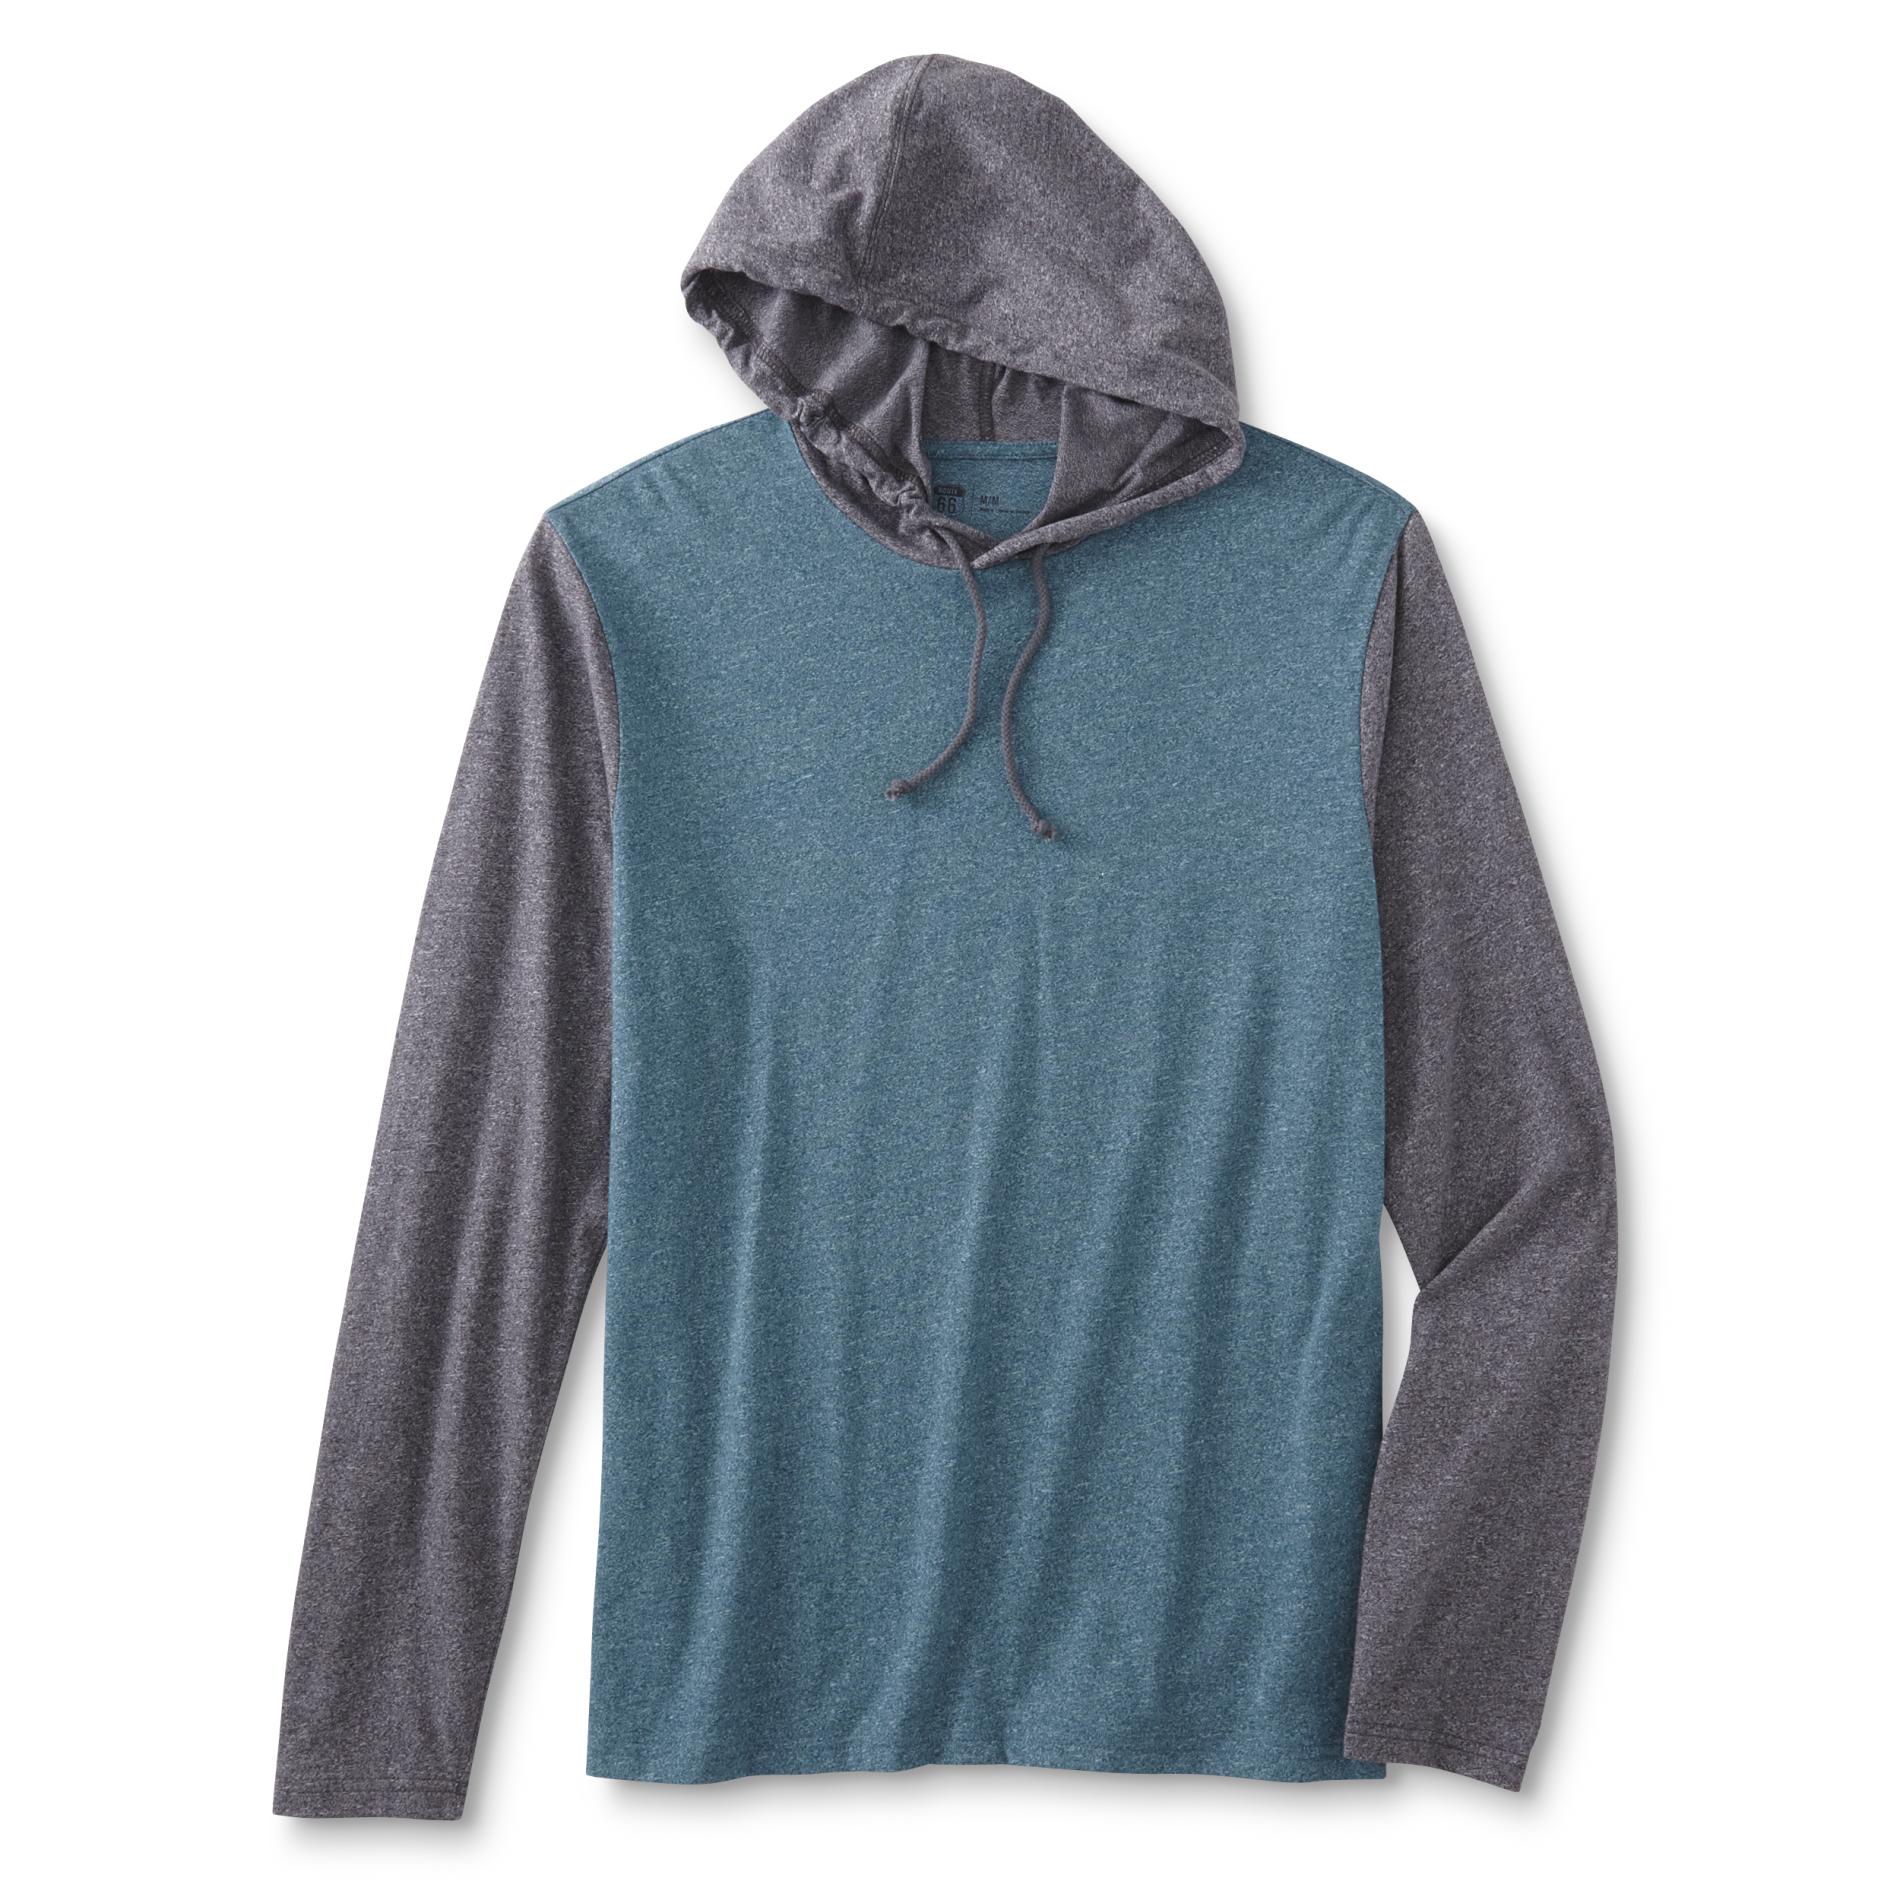 Route 66 Men's Hooded Shirt - Space Dyed